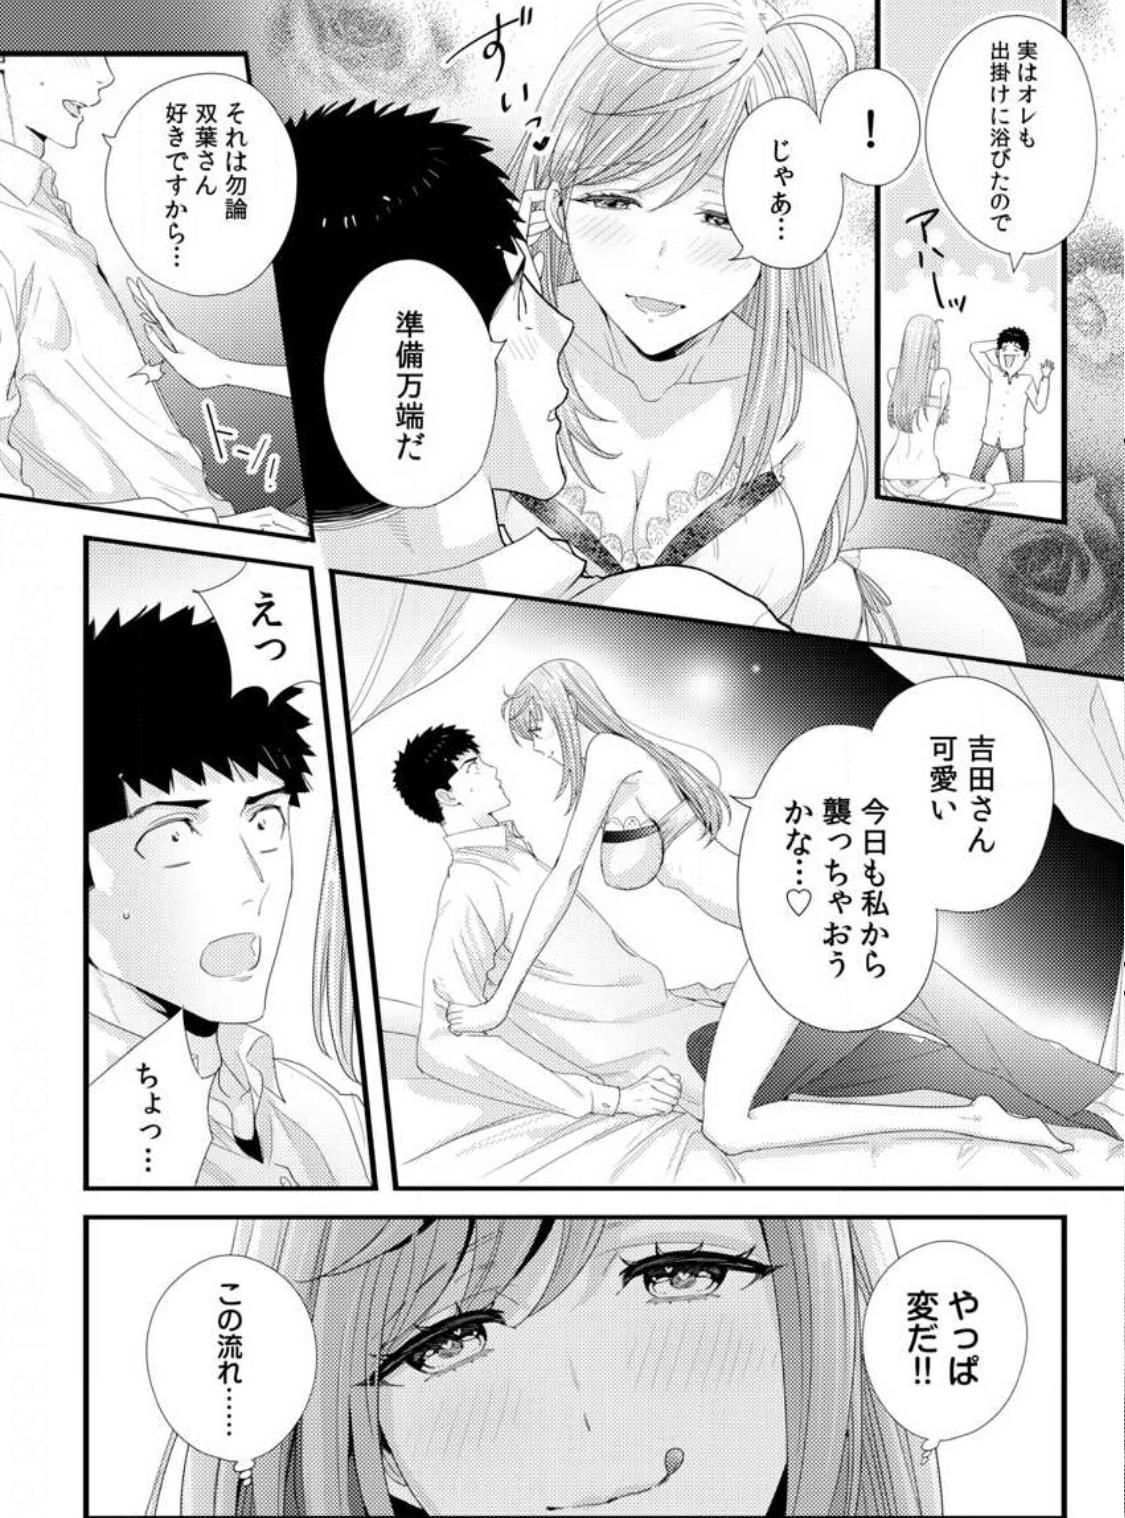 Please Let Me Hold You Futaba-San! Ch. 1-4 91